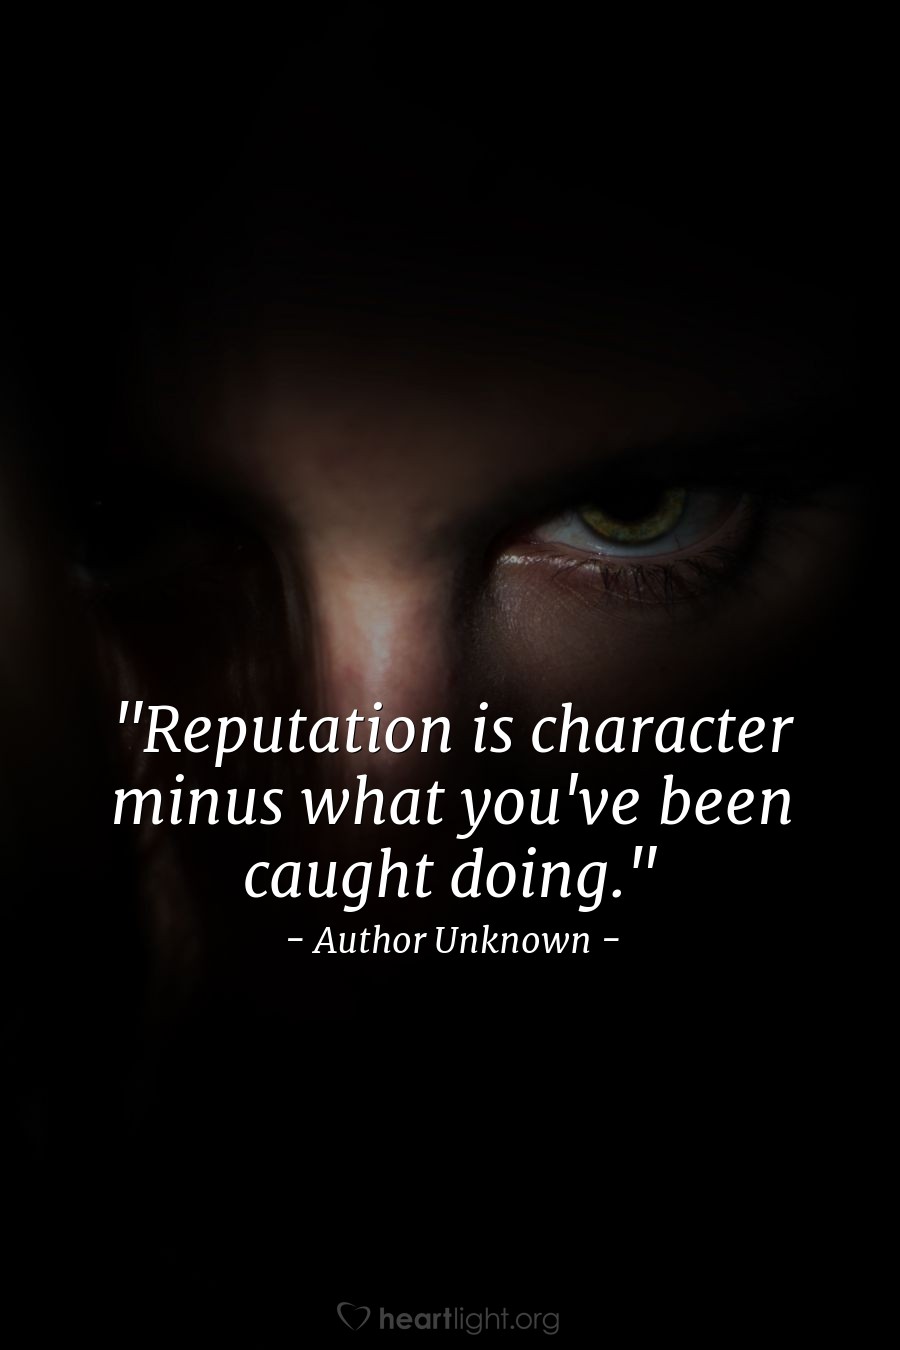 Illustration of Author Unknown — "Reputation is character minus what you've been caught doing."